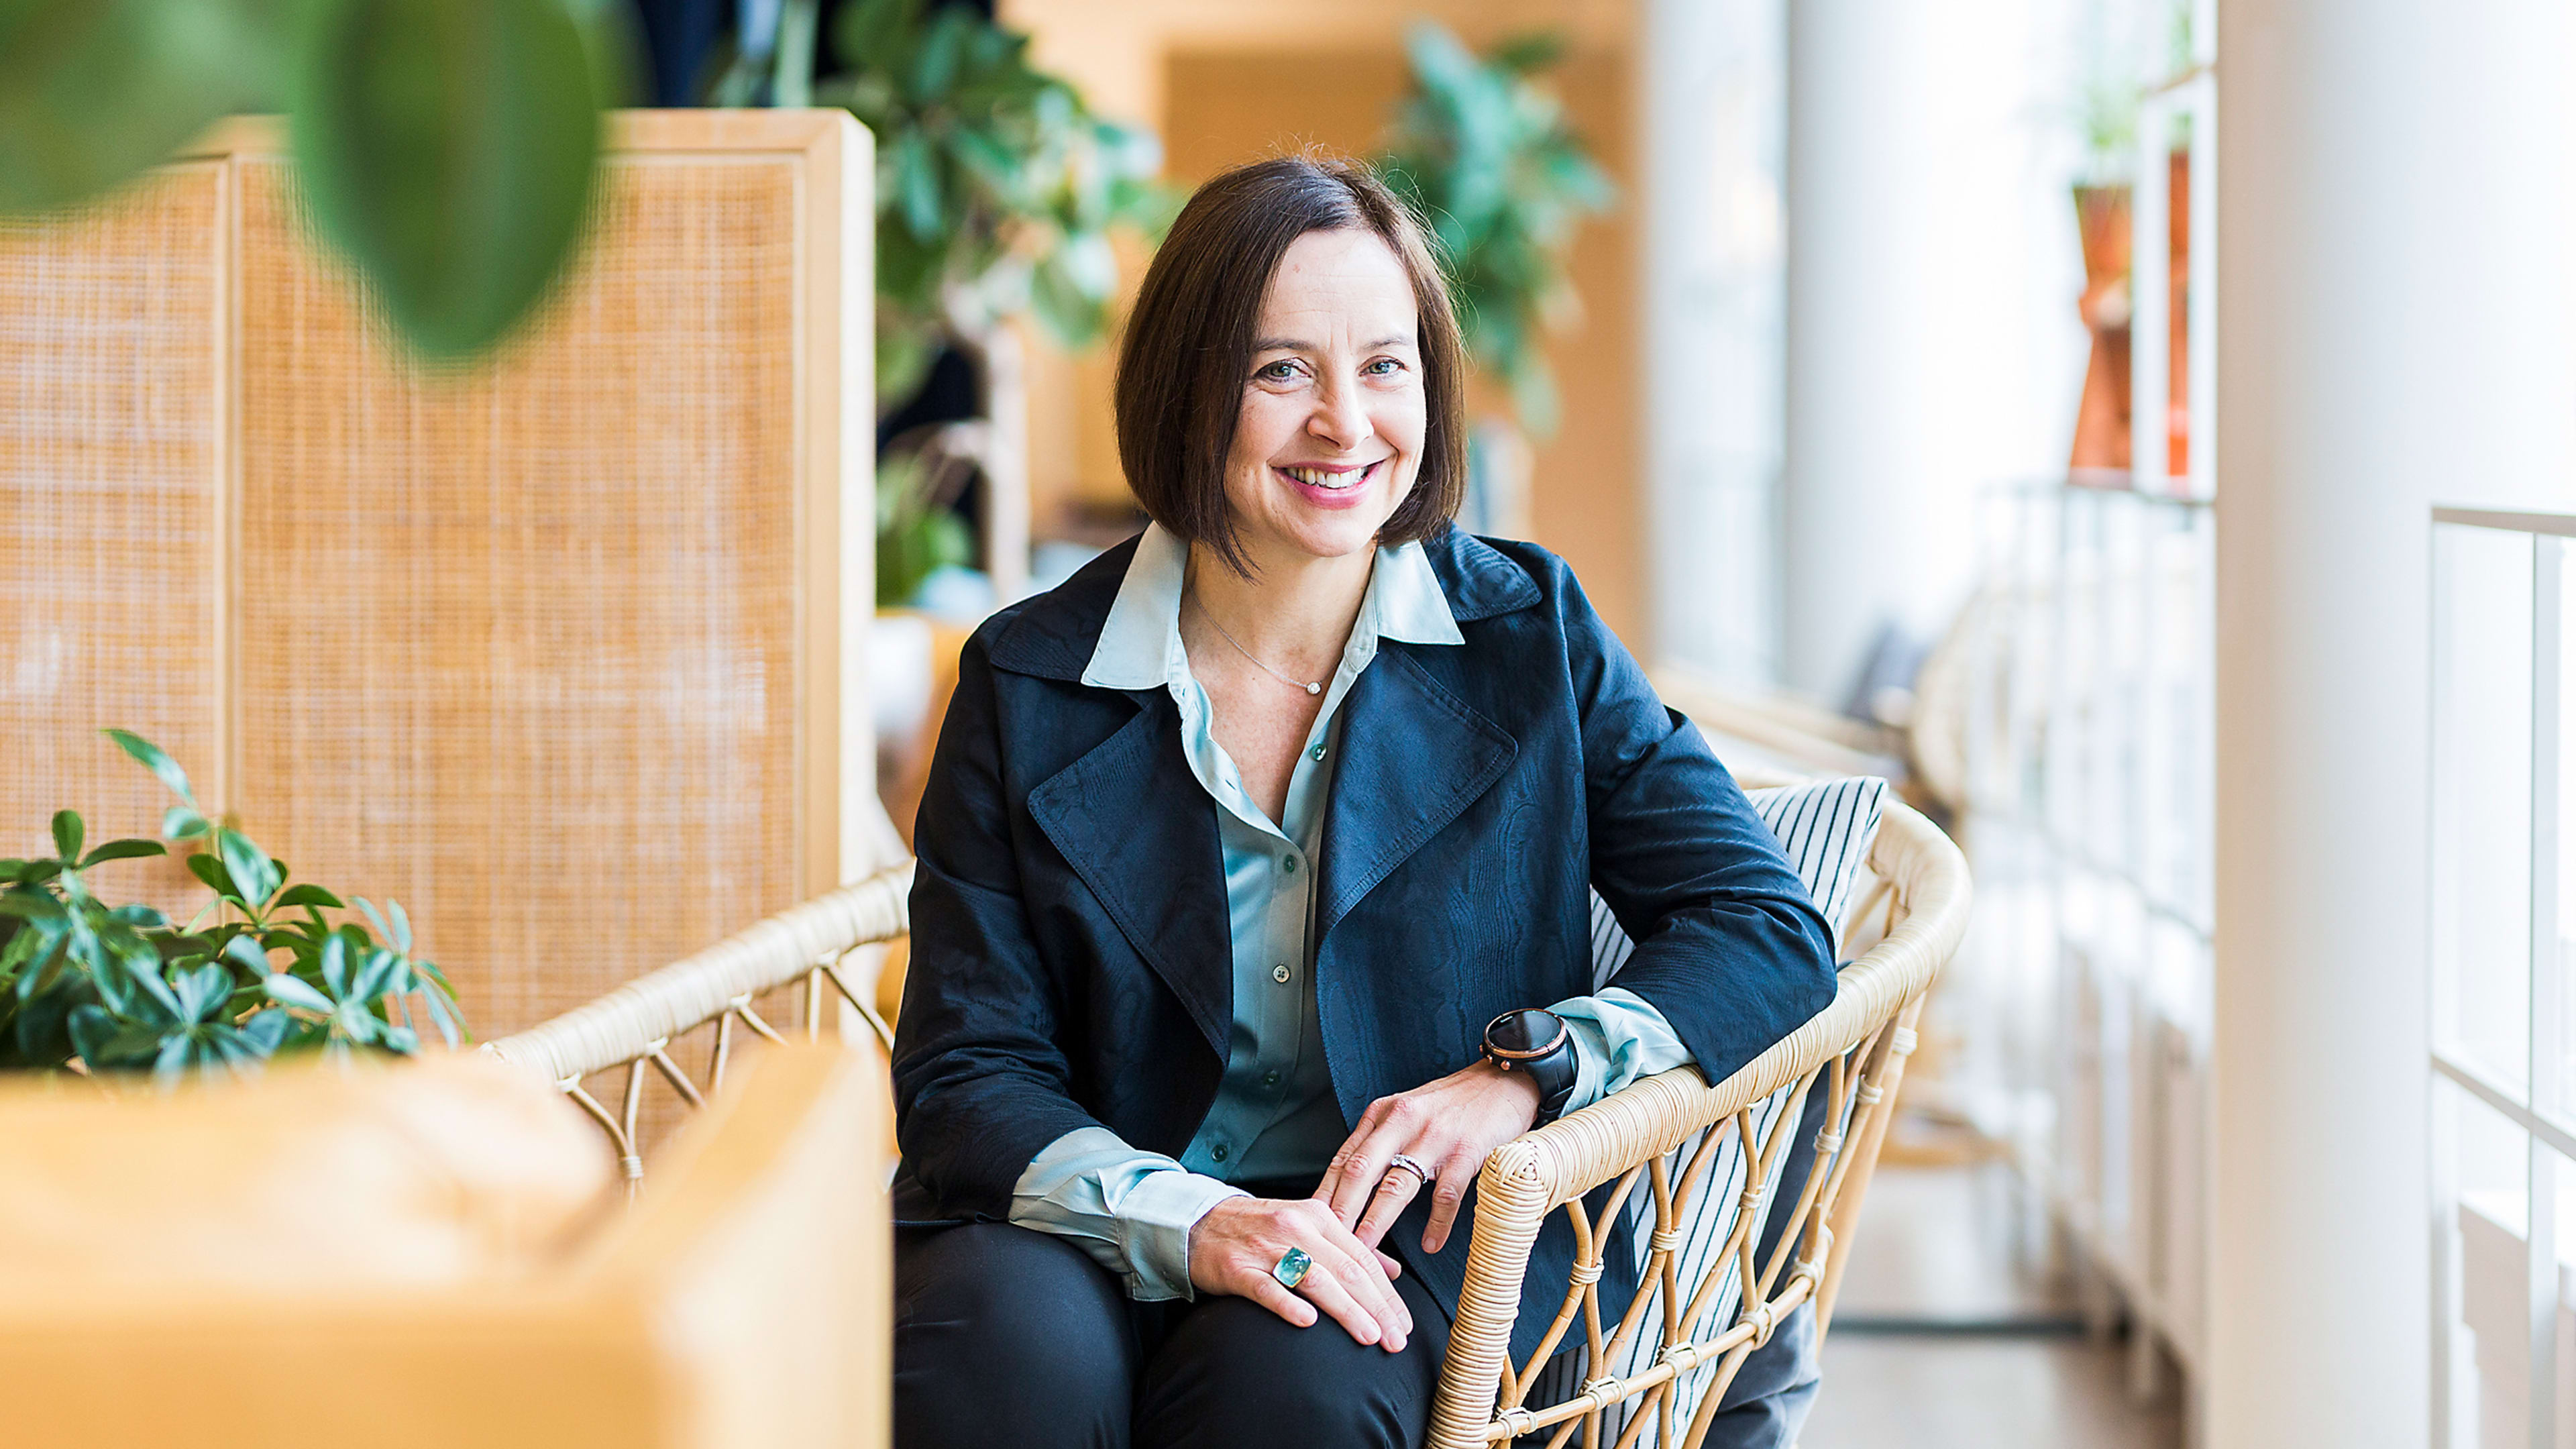 A day in the life of a chief sustainability officer: Q&A with Ikea’s Karen Pflug